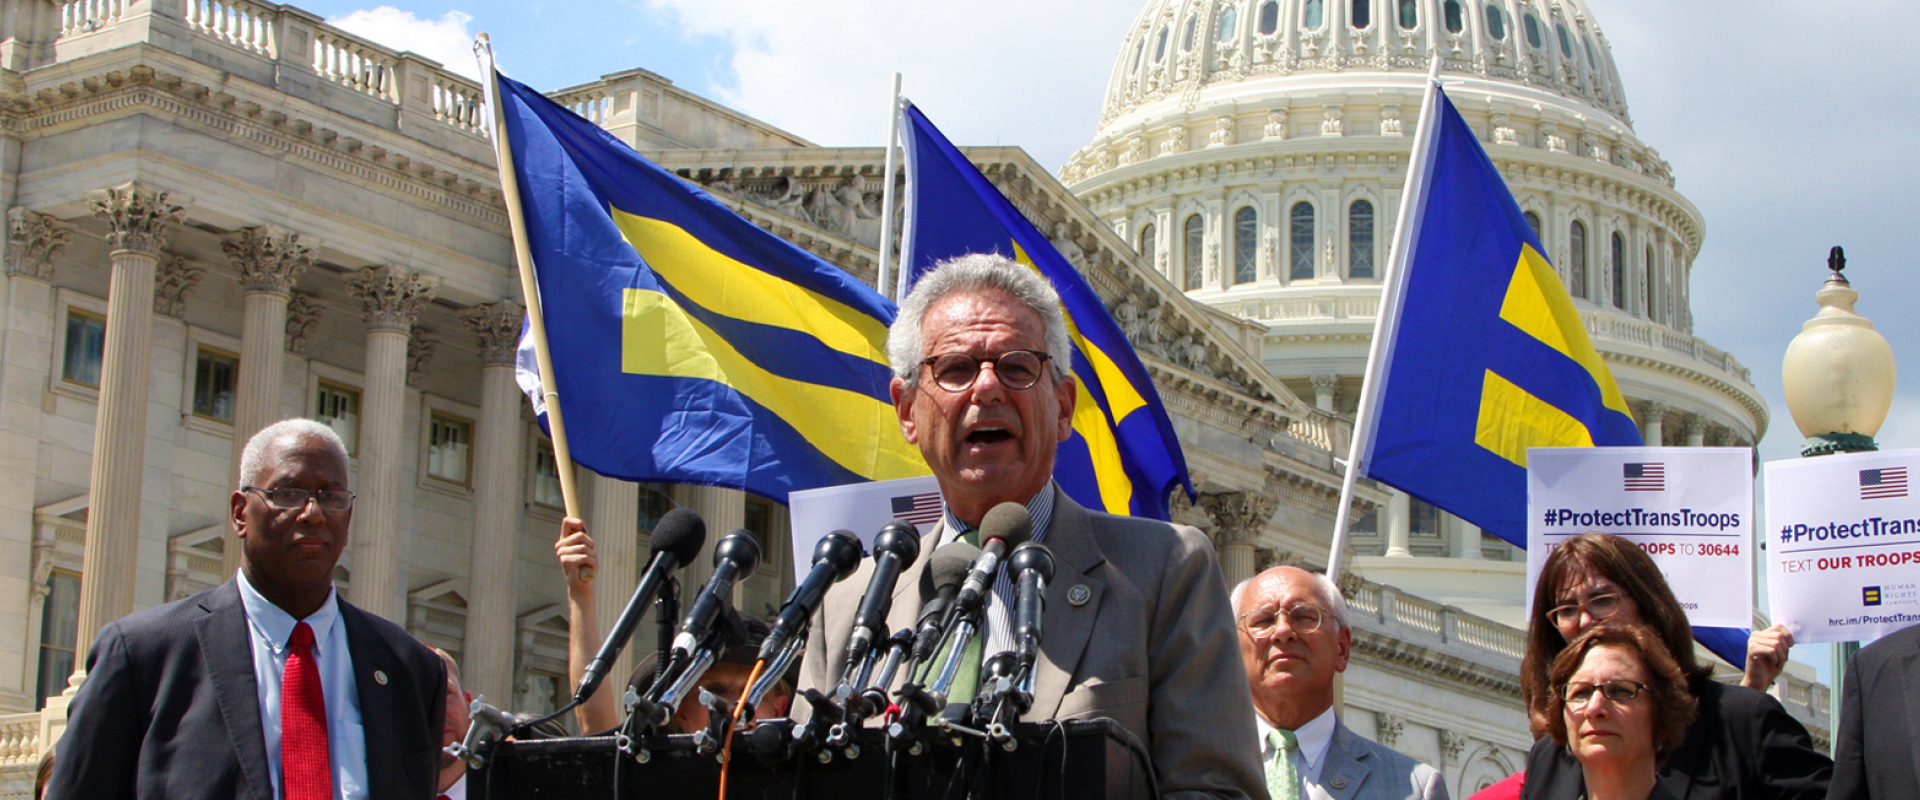 Rep. Lowenthal speaking at the podium in front of the Capitol